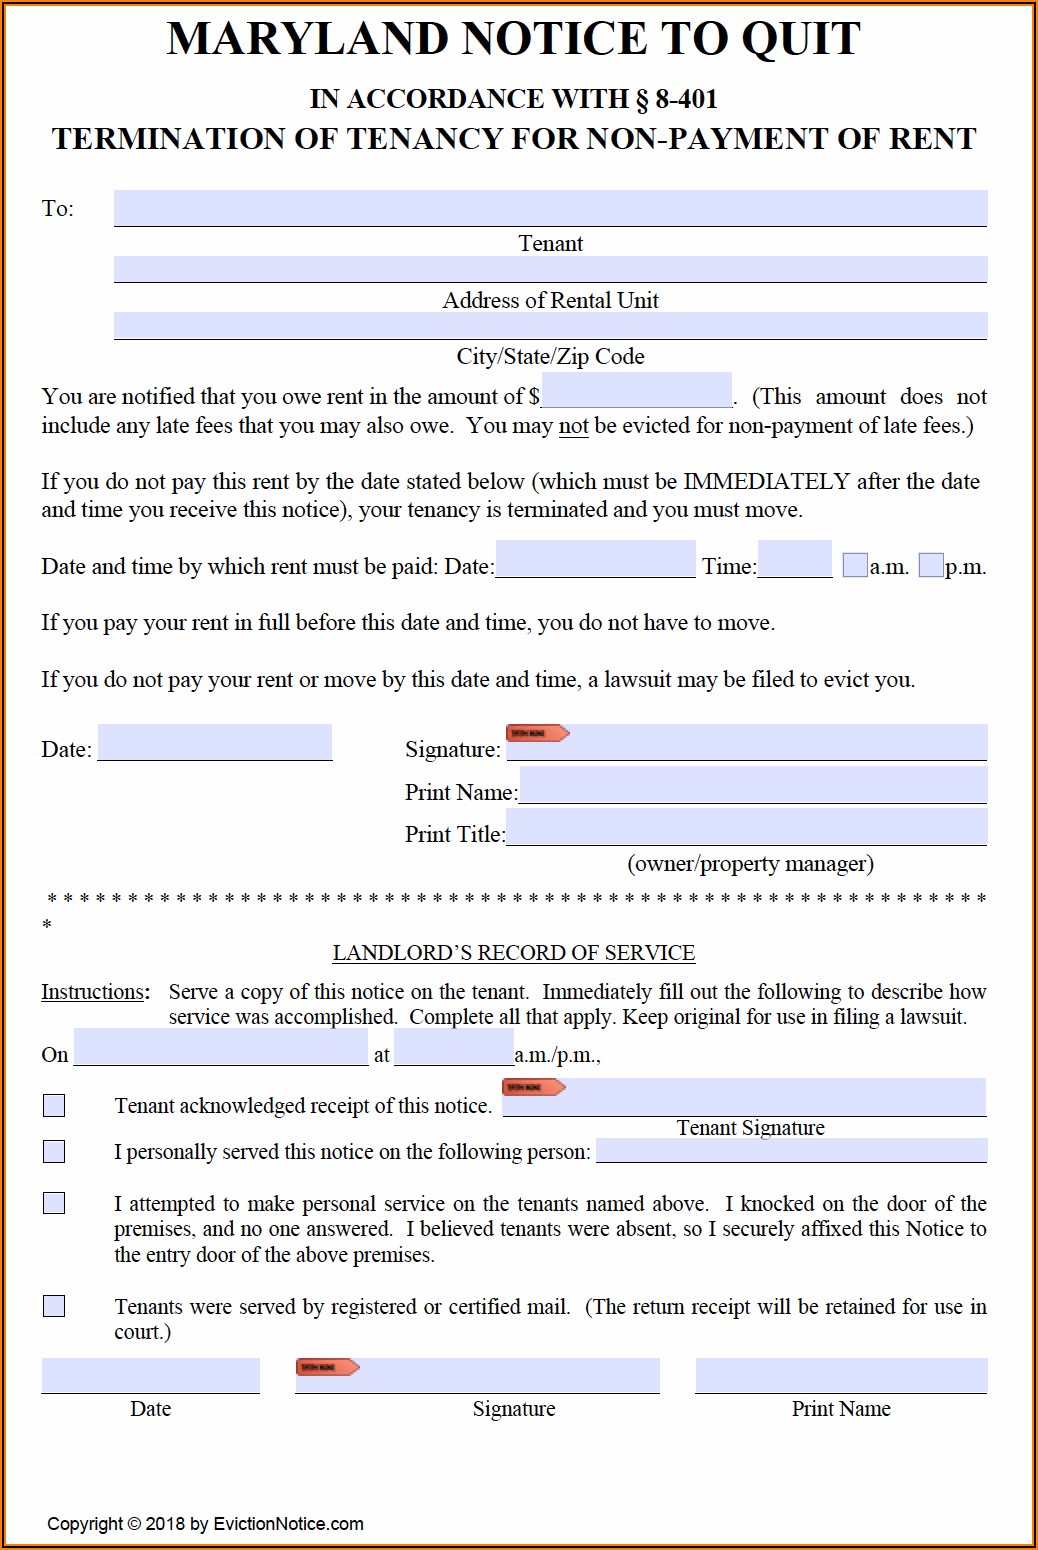 Baltimore City Eviction Forms